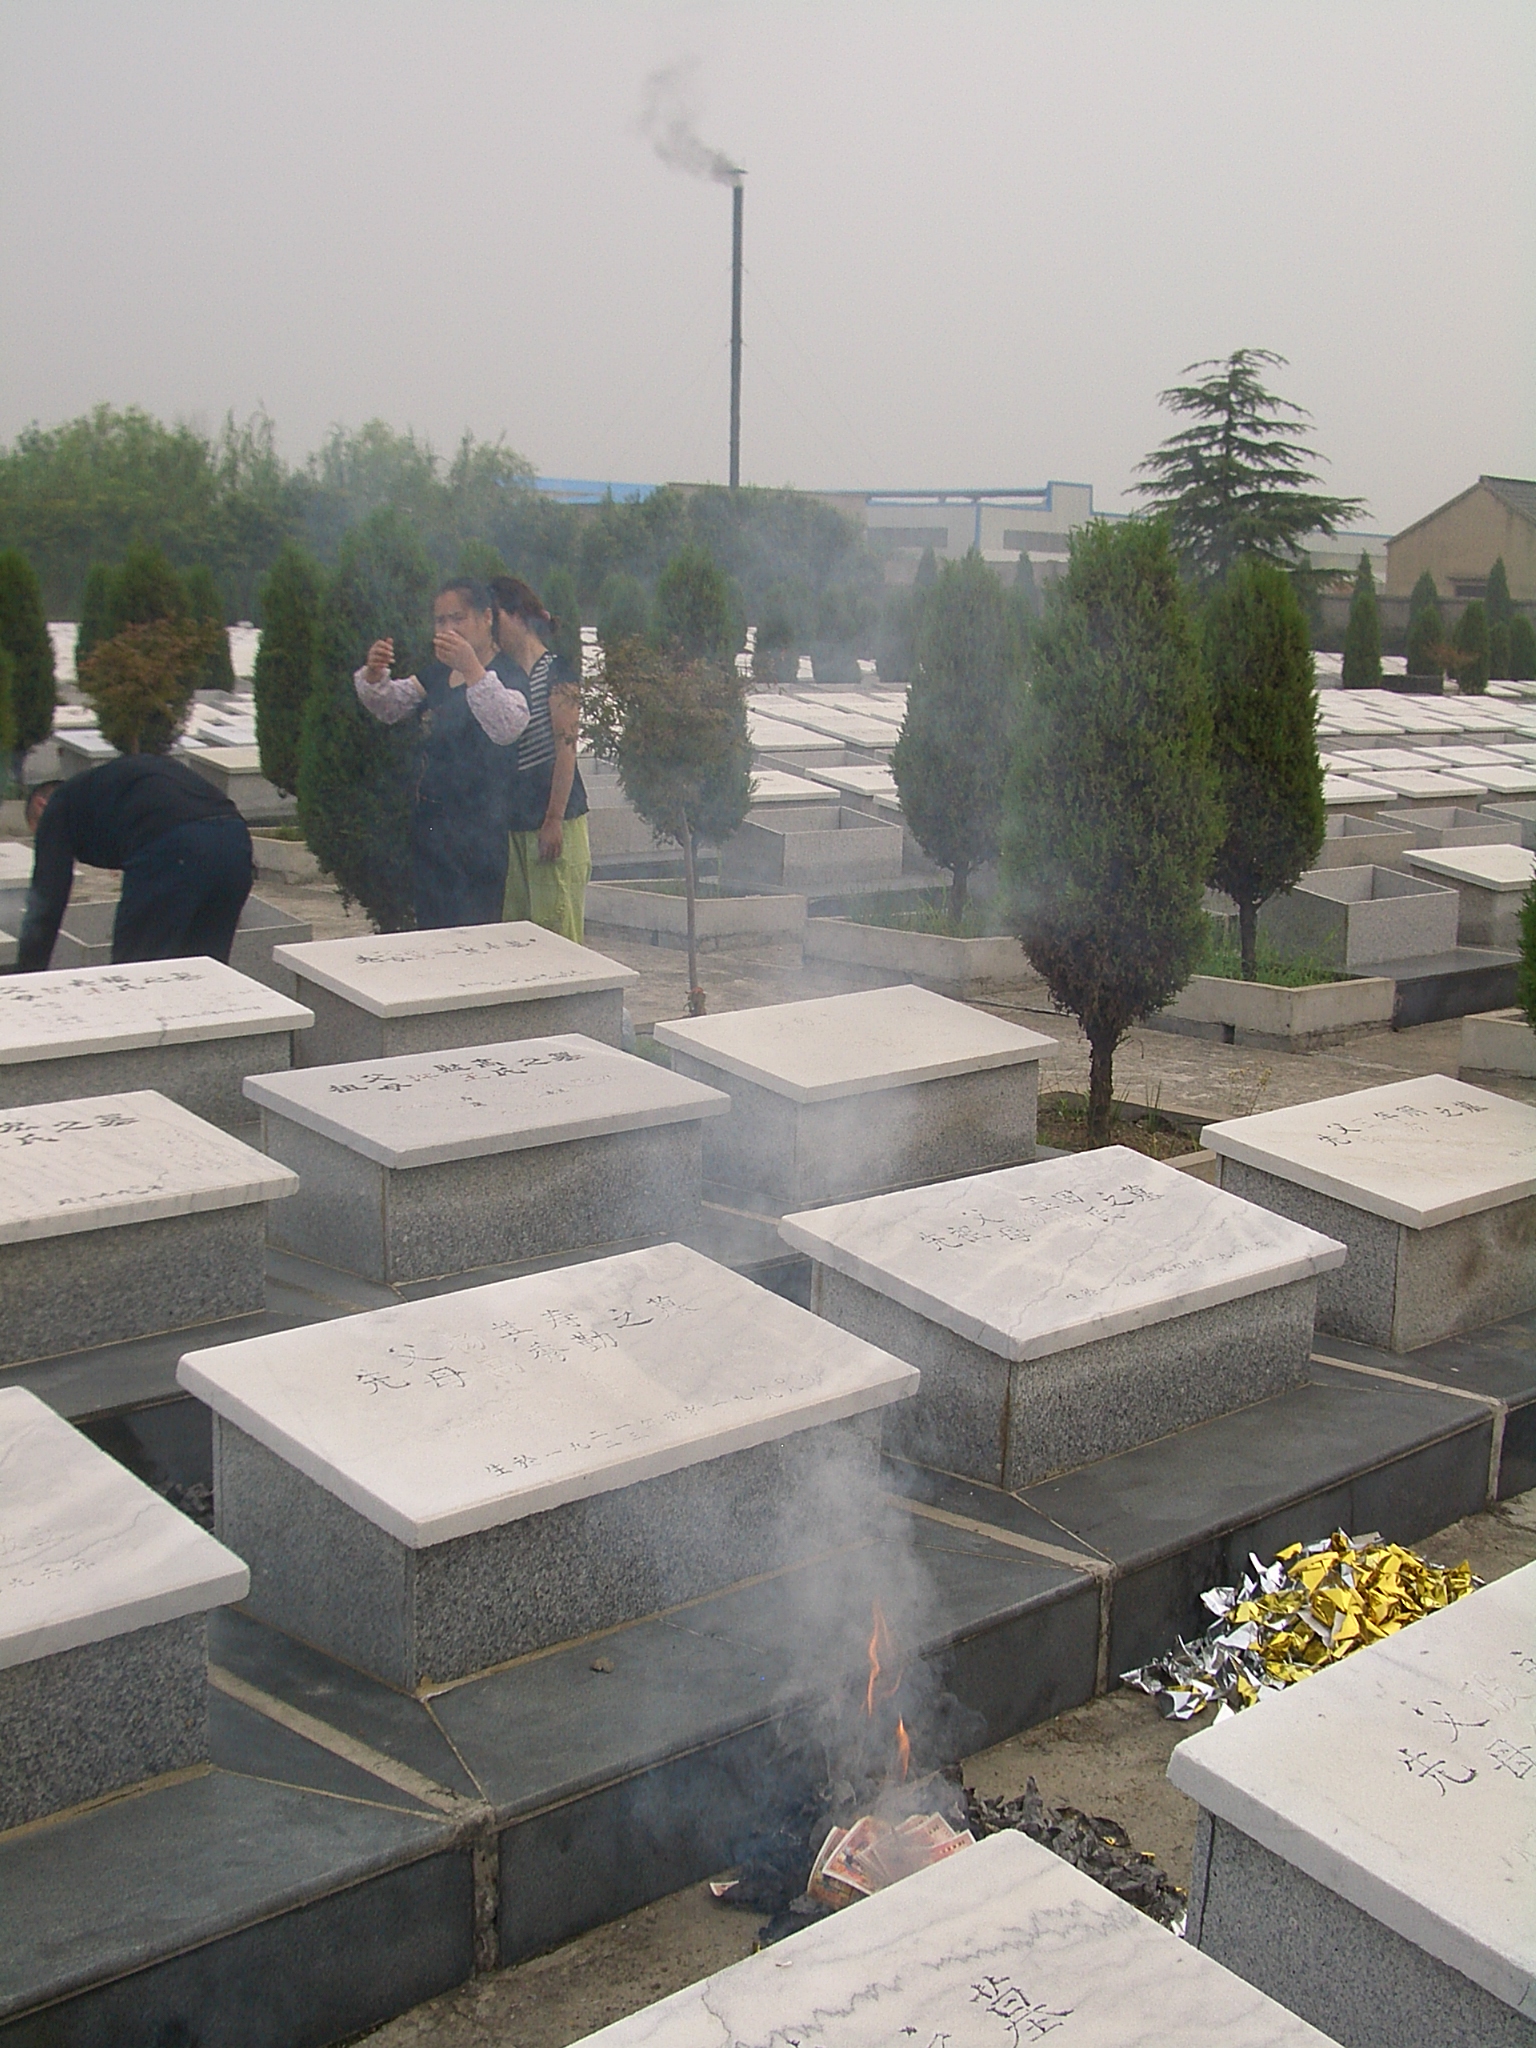 File:Burning-money-and-yuanbao-at-the-cemetery-3247.JPG - Wikimedia Commons